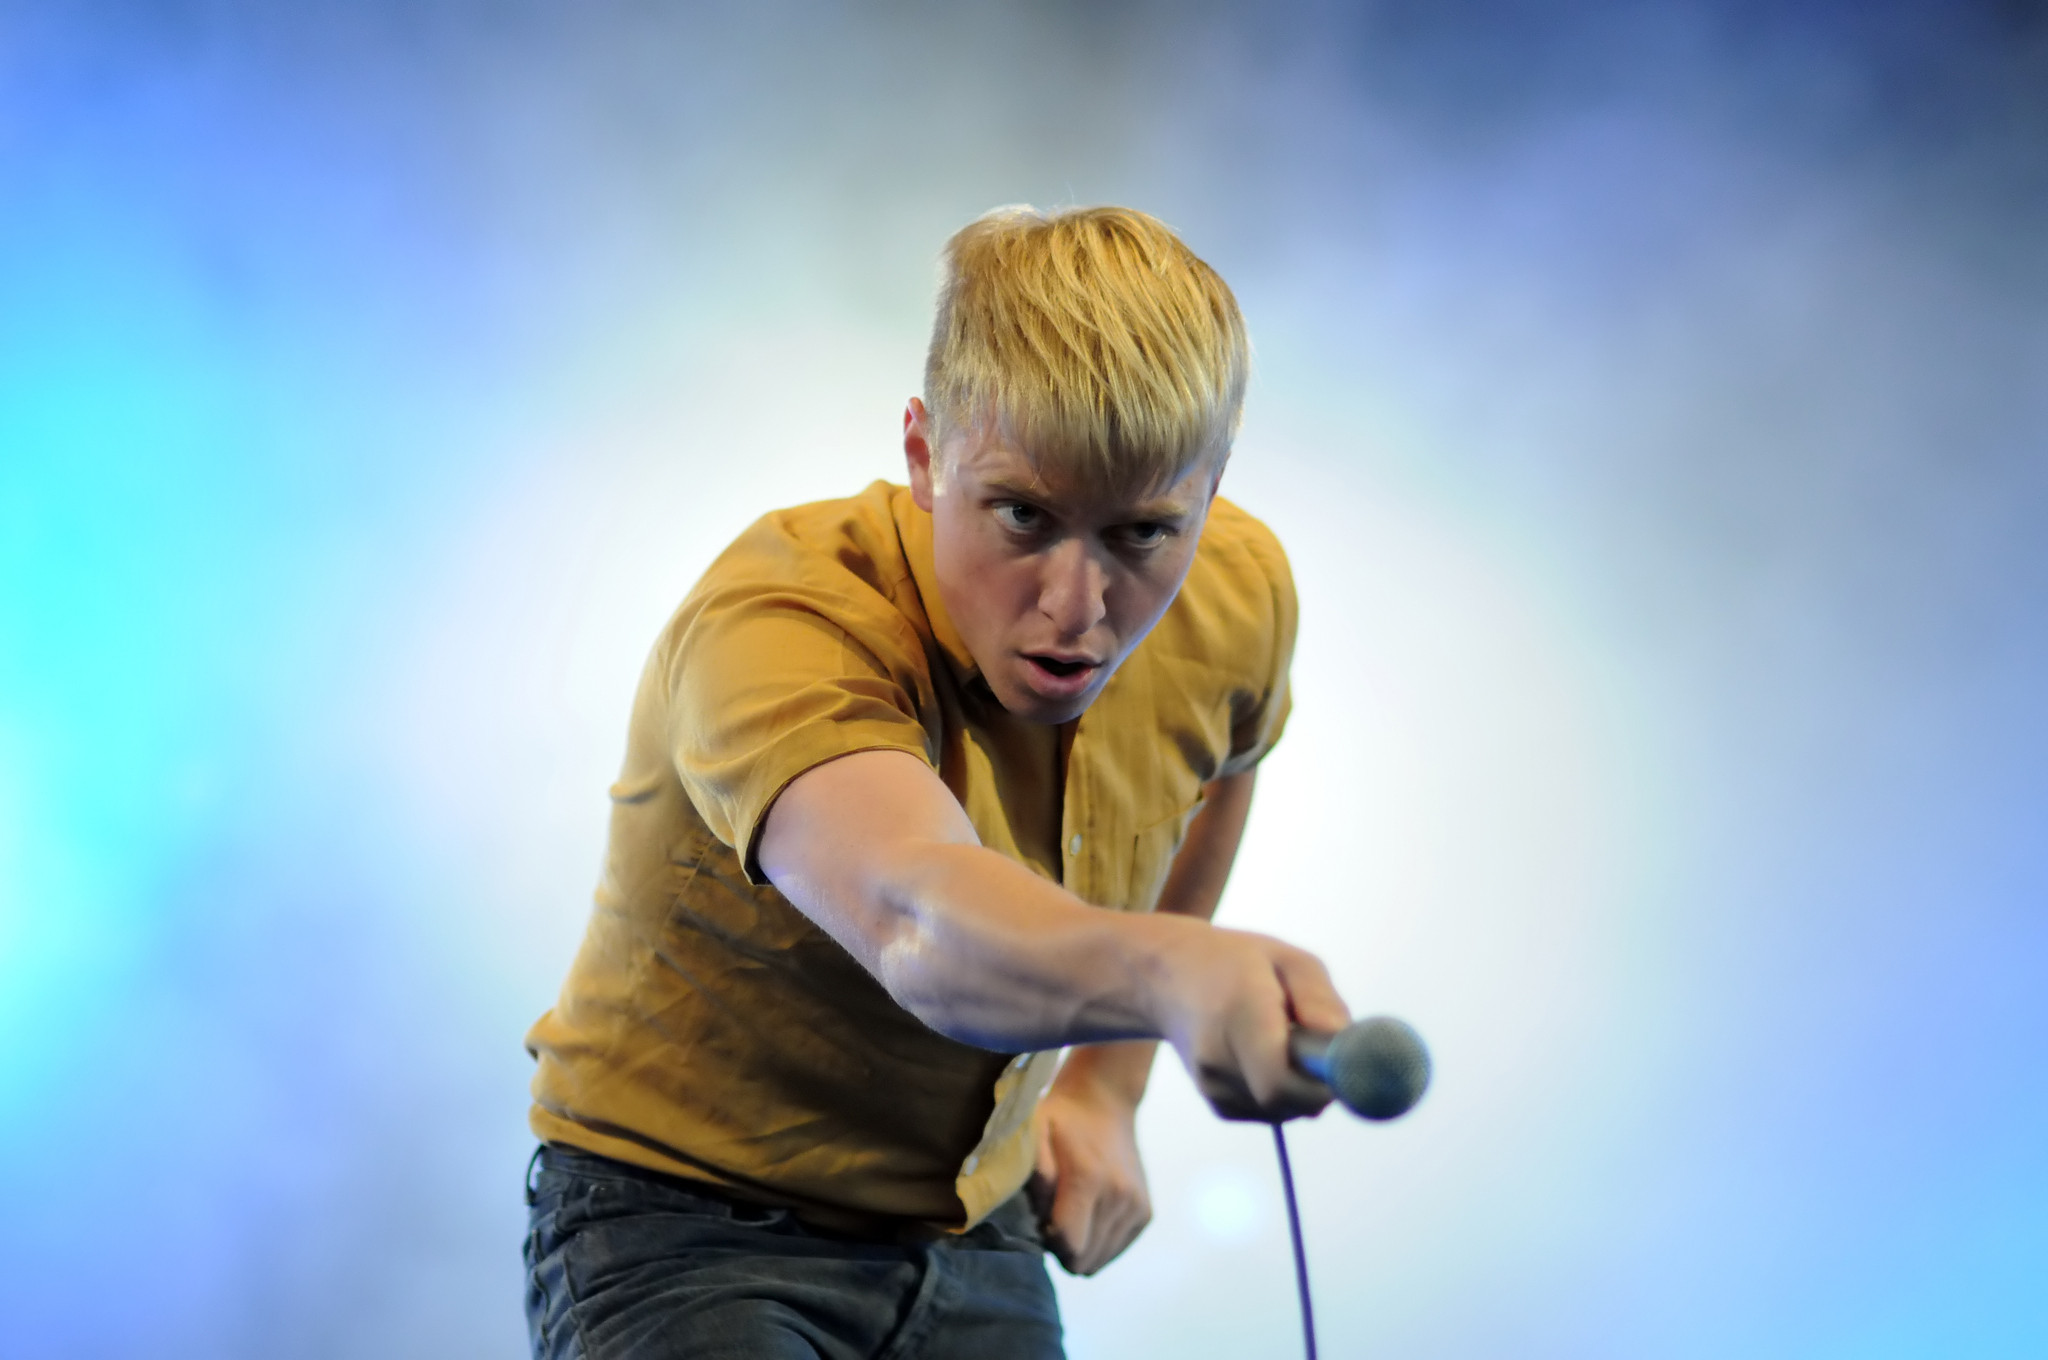 Thedrums_2